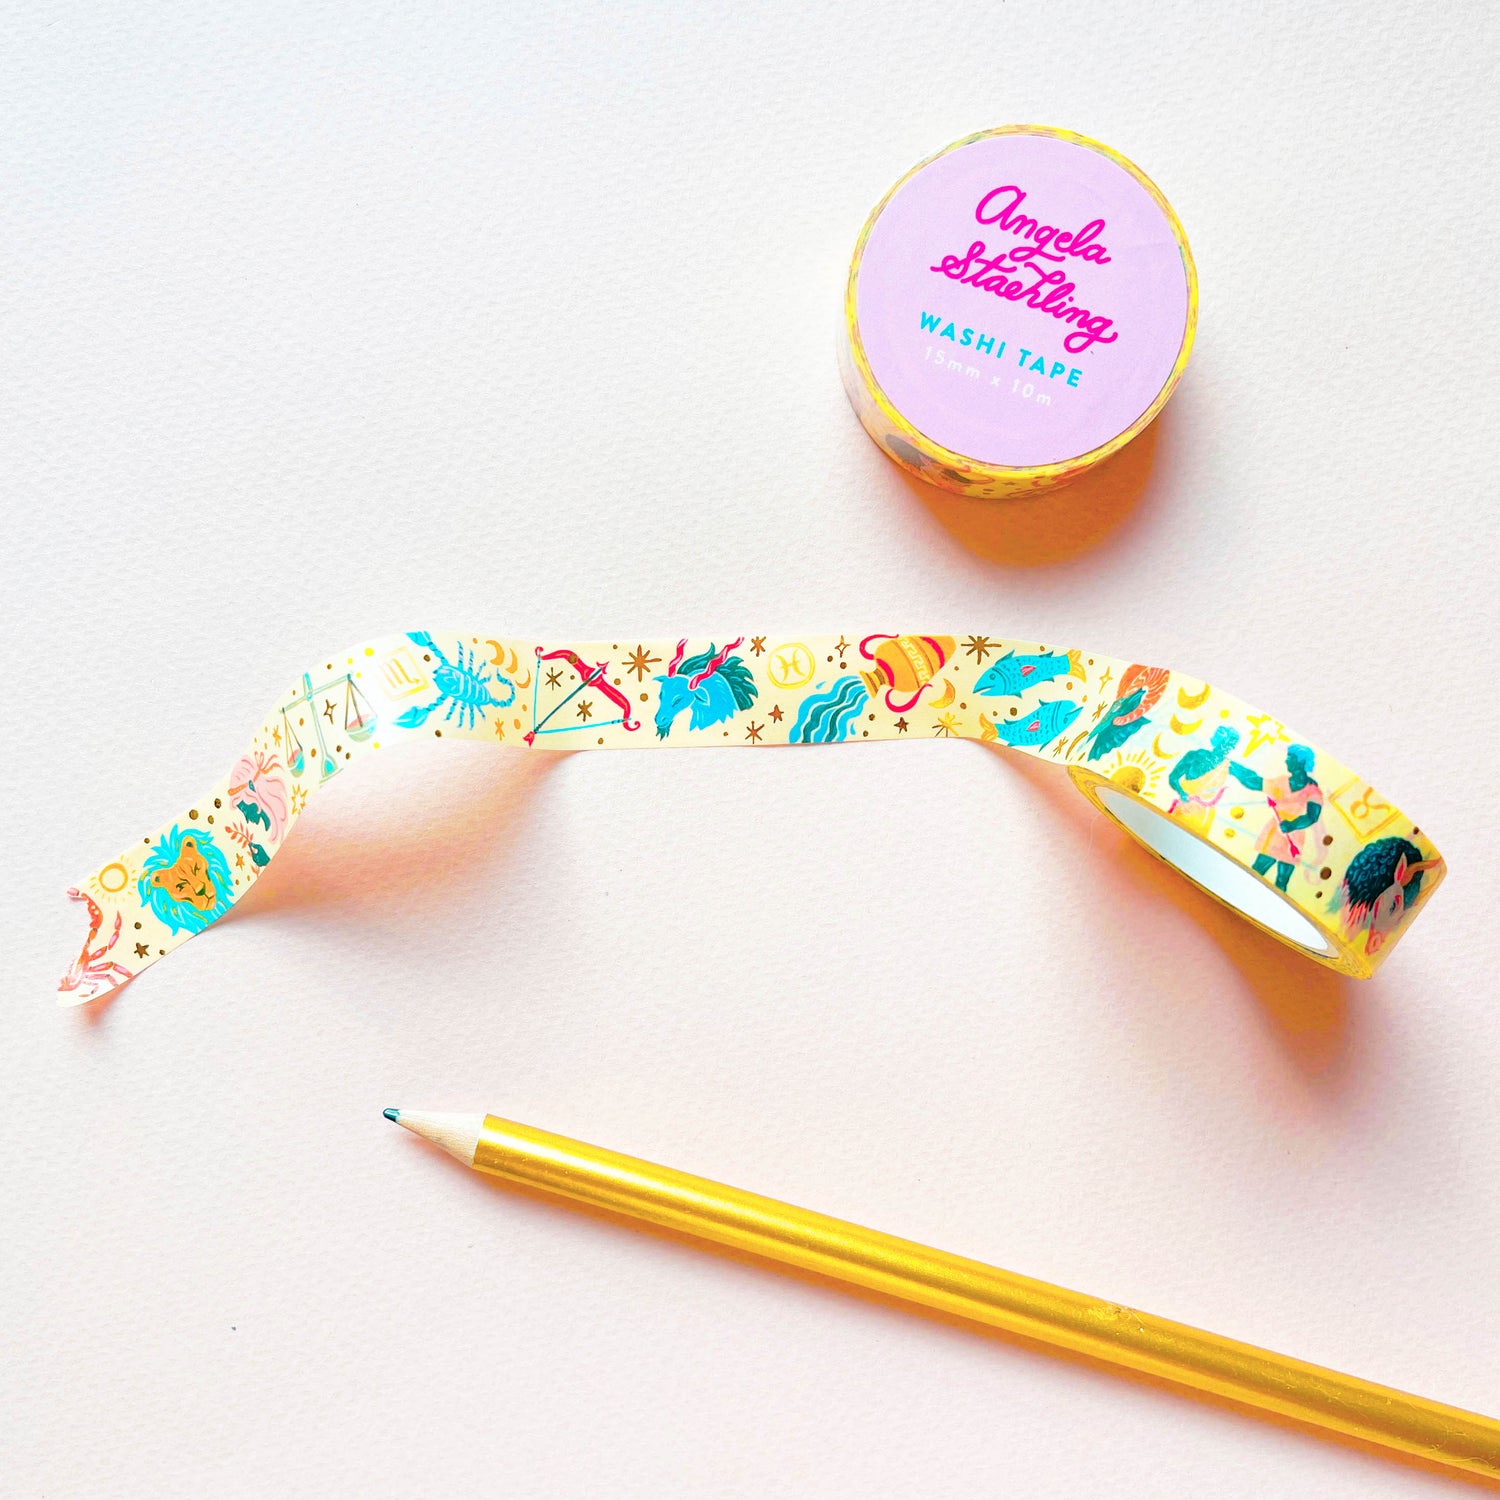 Zodiac sign washi tape with gold foil stars and moons